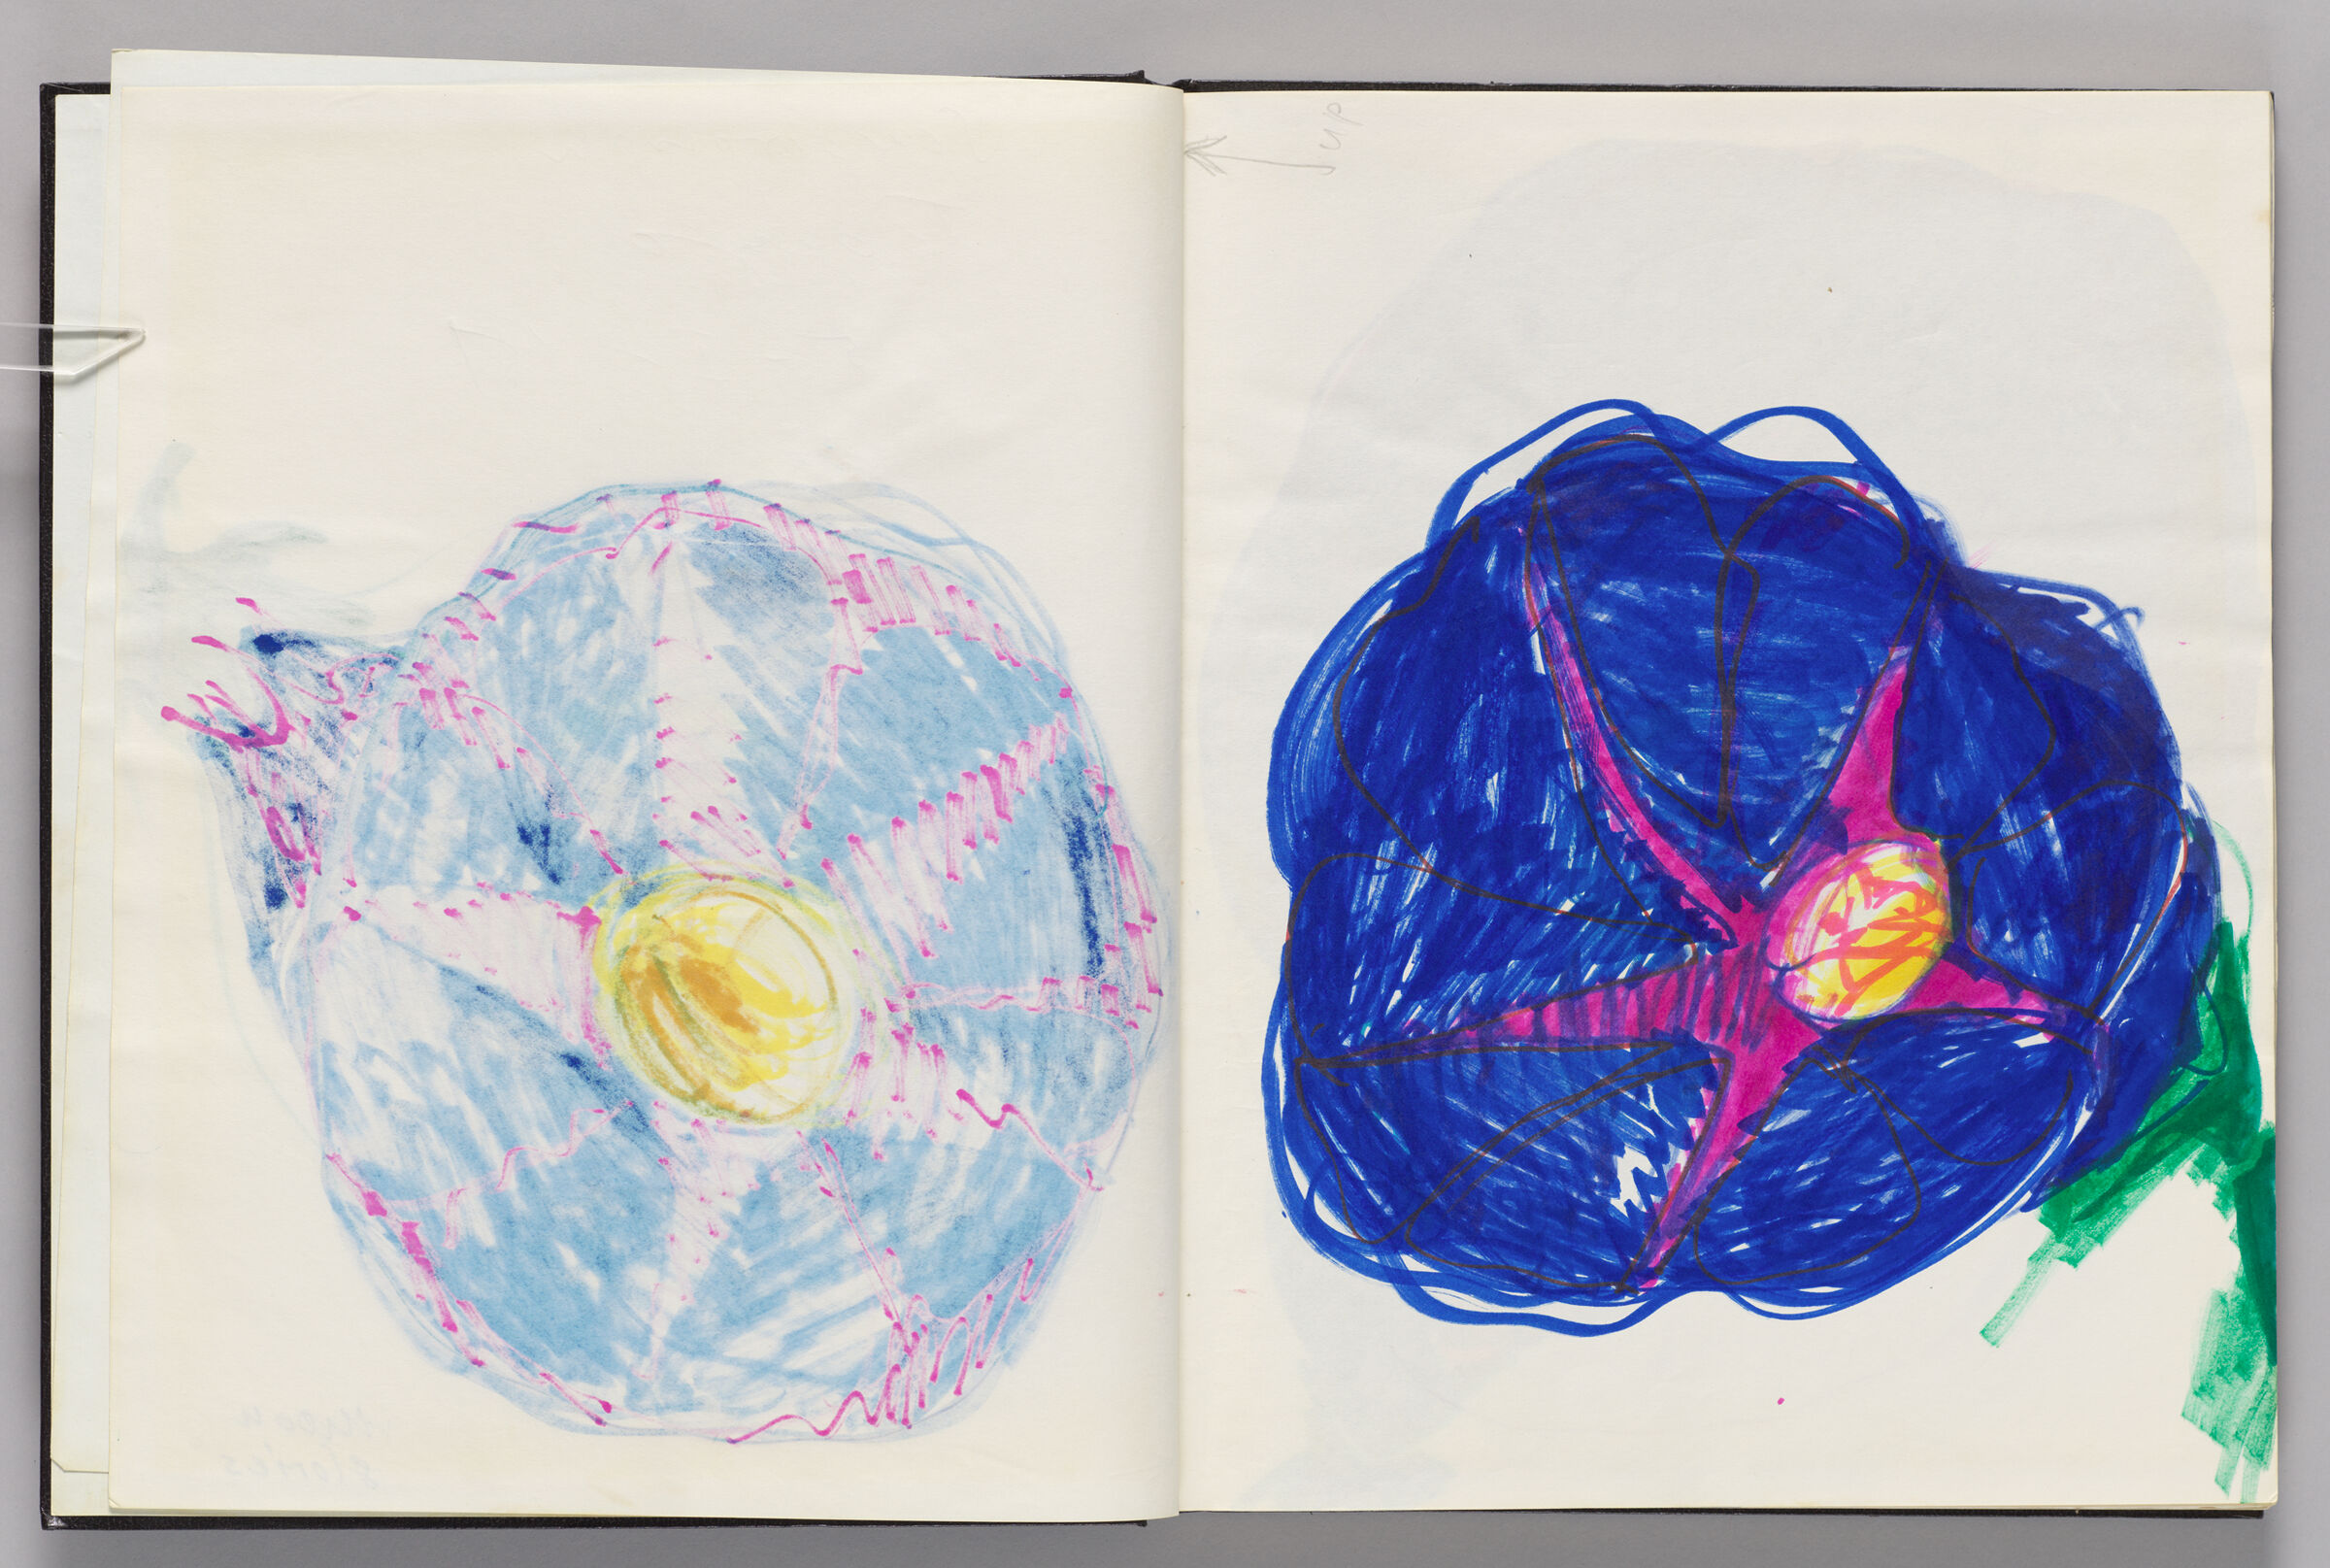 Untitled (Bleed-Through Of Previous Page, Left Page); Untitled (Moon Glory, Right Page)